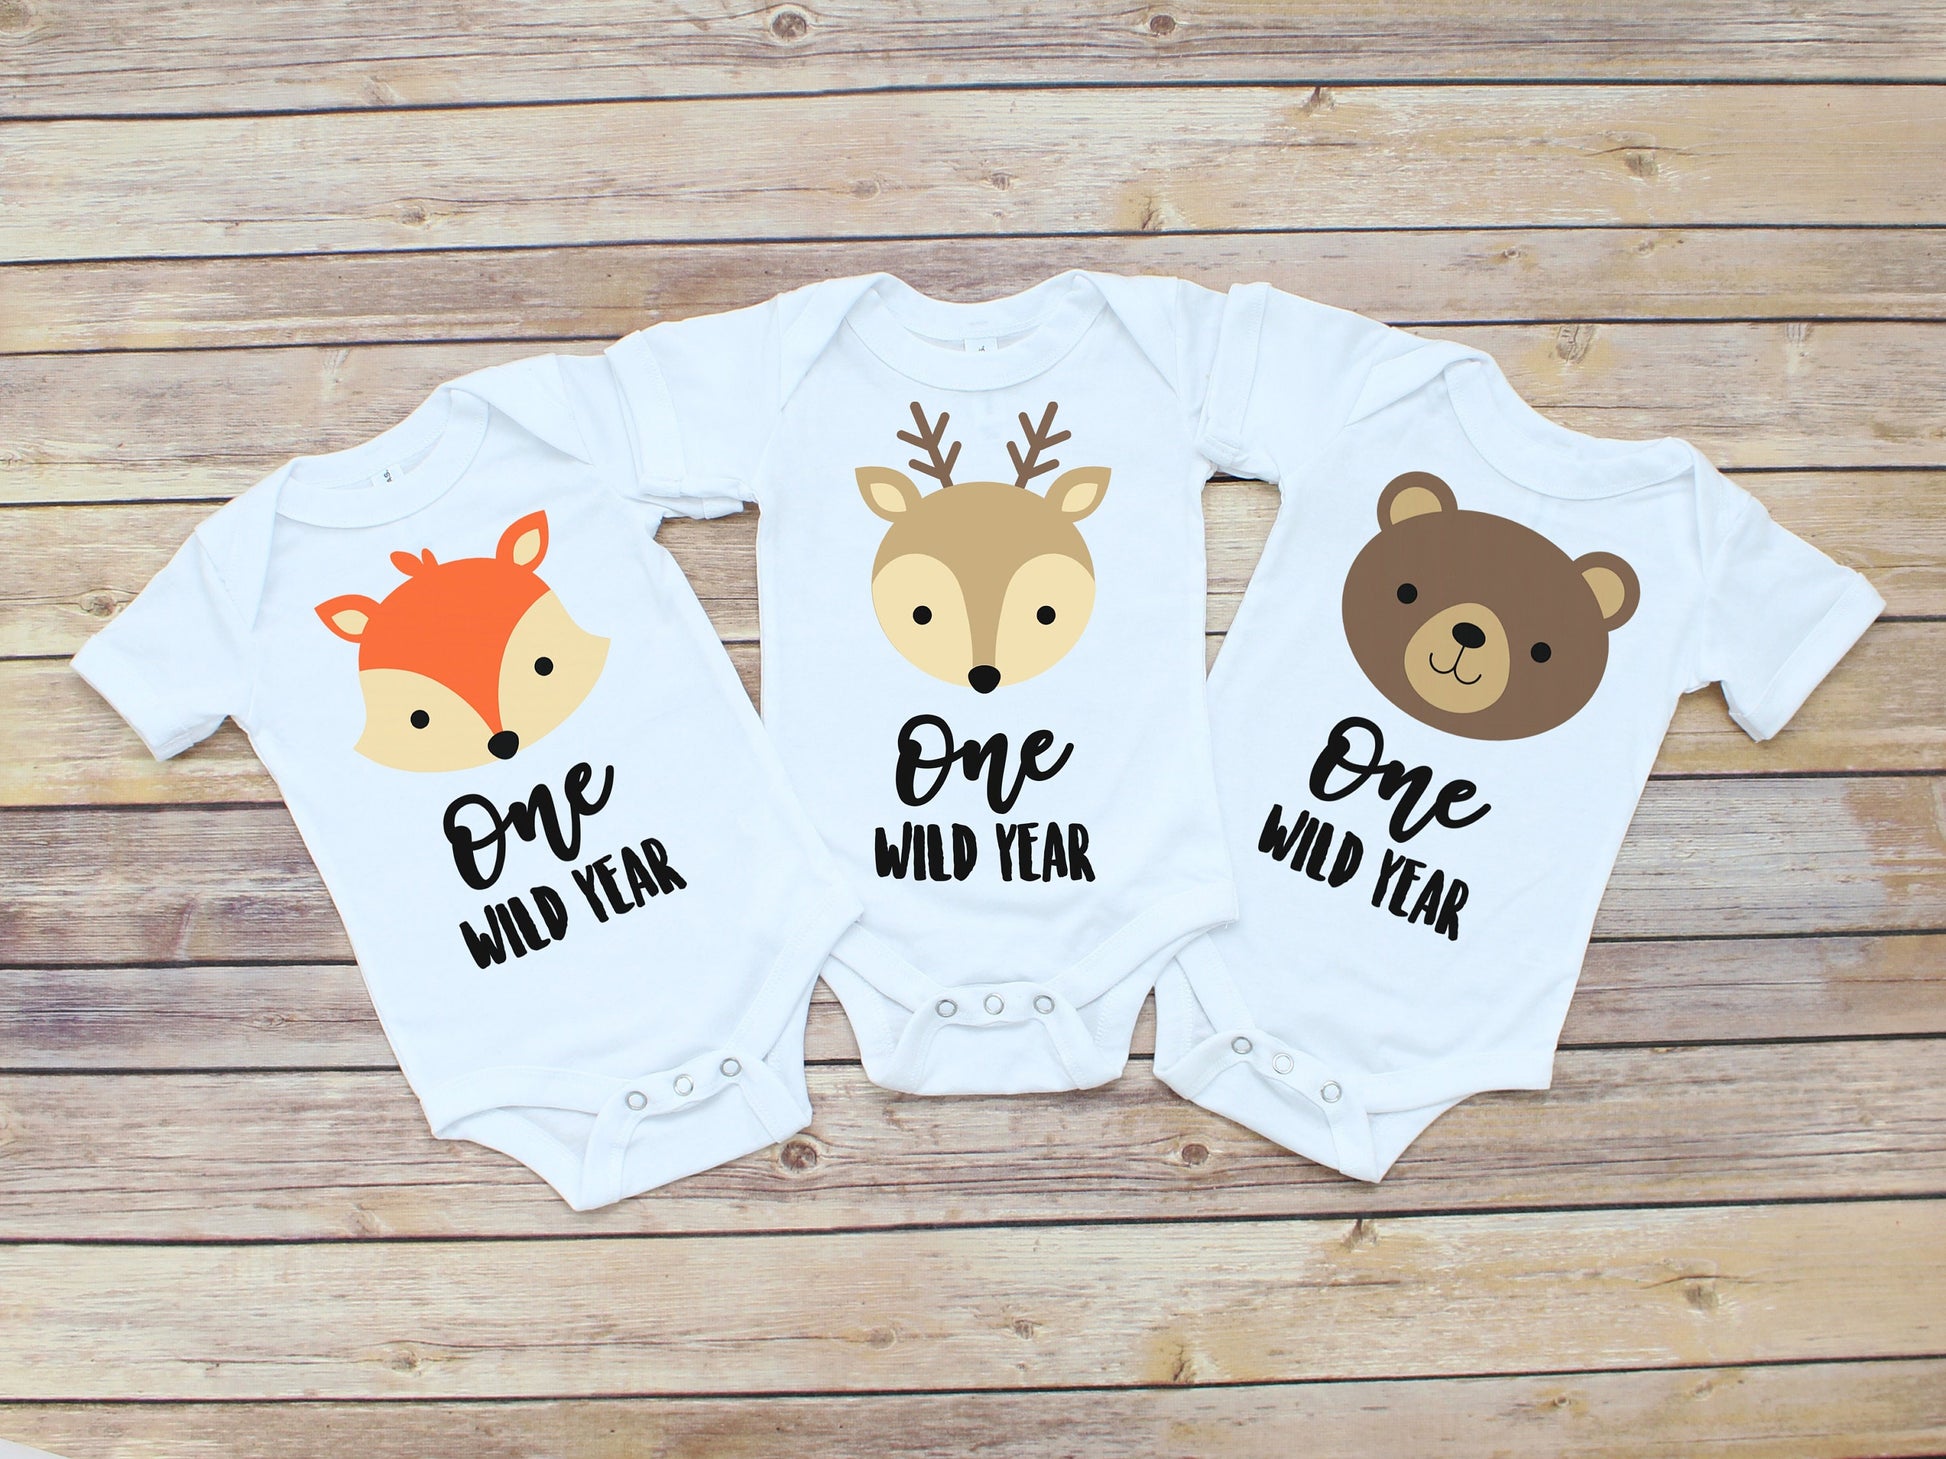 One Wild Year Infant or Toddler Shirt or Bodysuit - Choose an Animal - Cute Toddler Shirt - Wild One Birthday Party - Forest animals